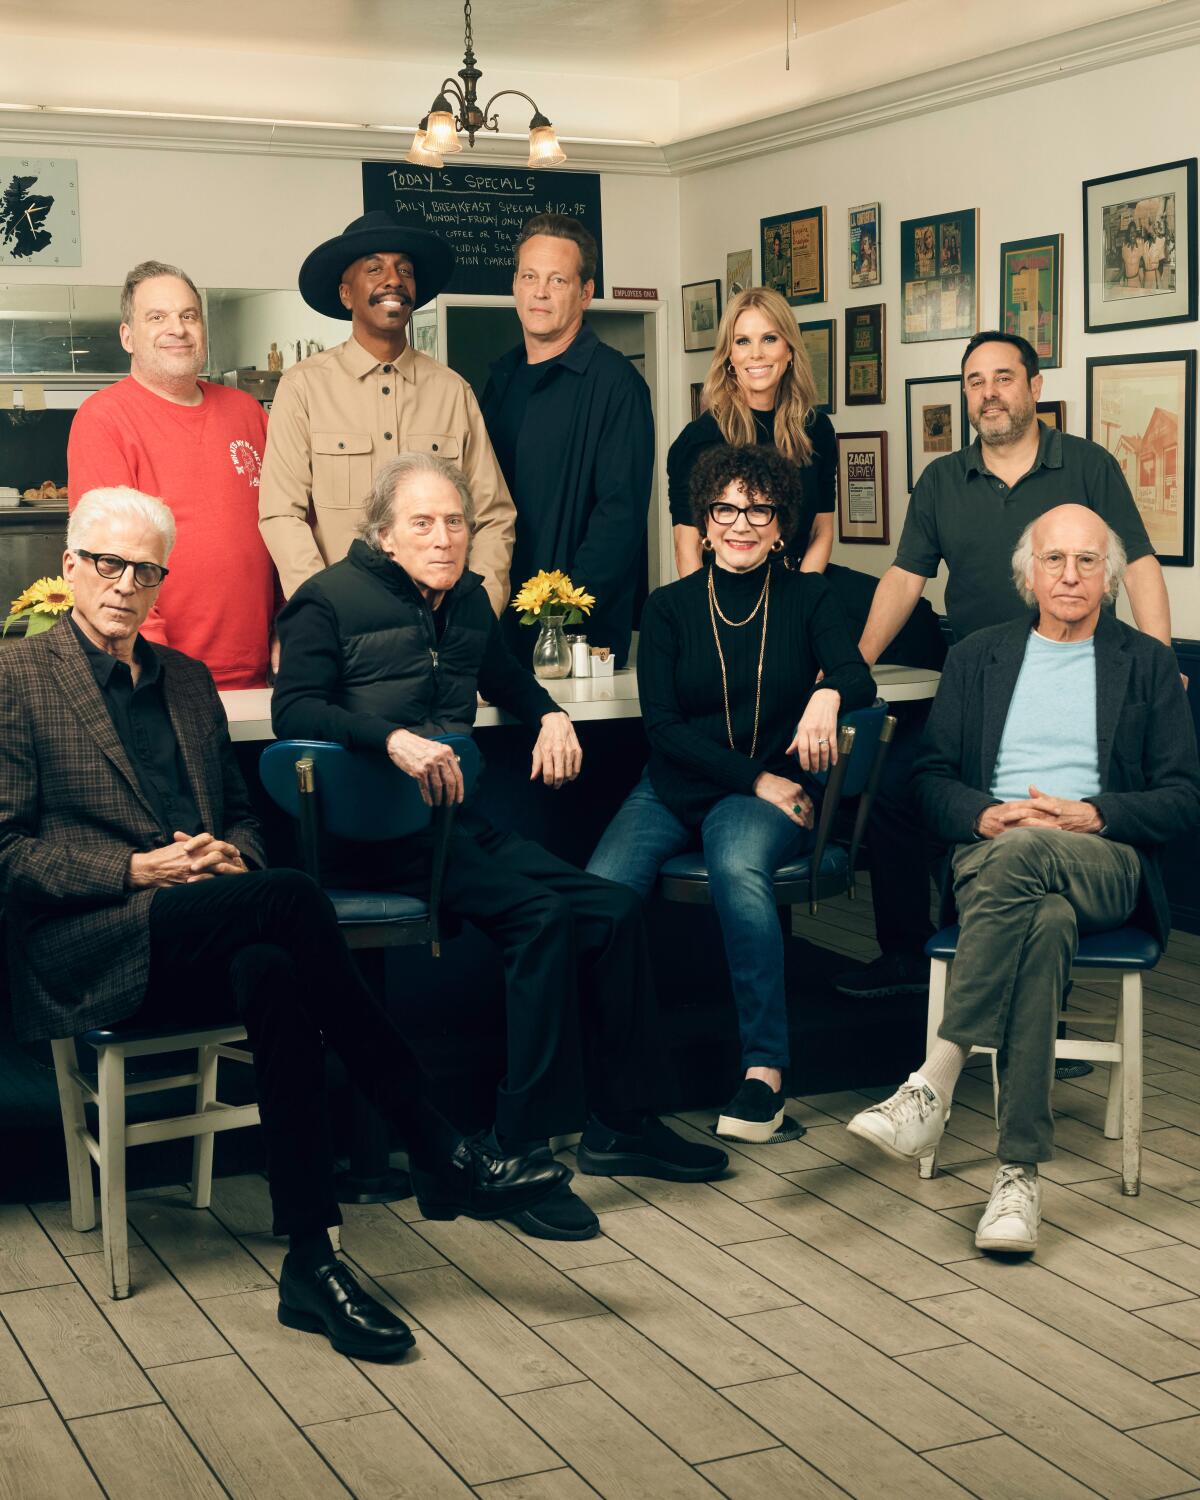 Group shot of Curb Your Enthusiasm cast